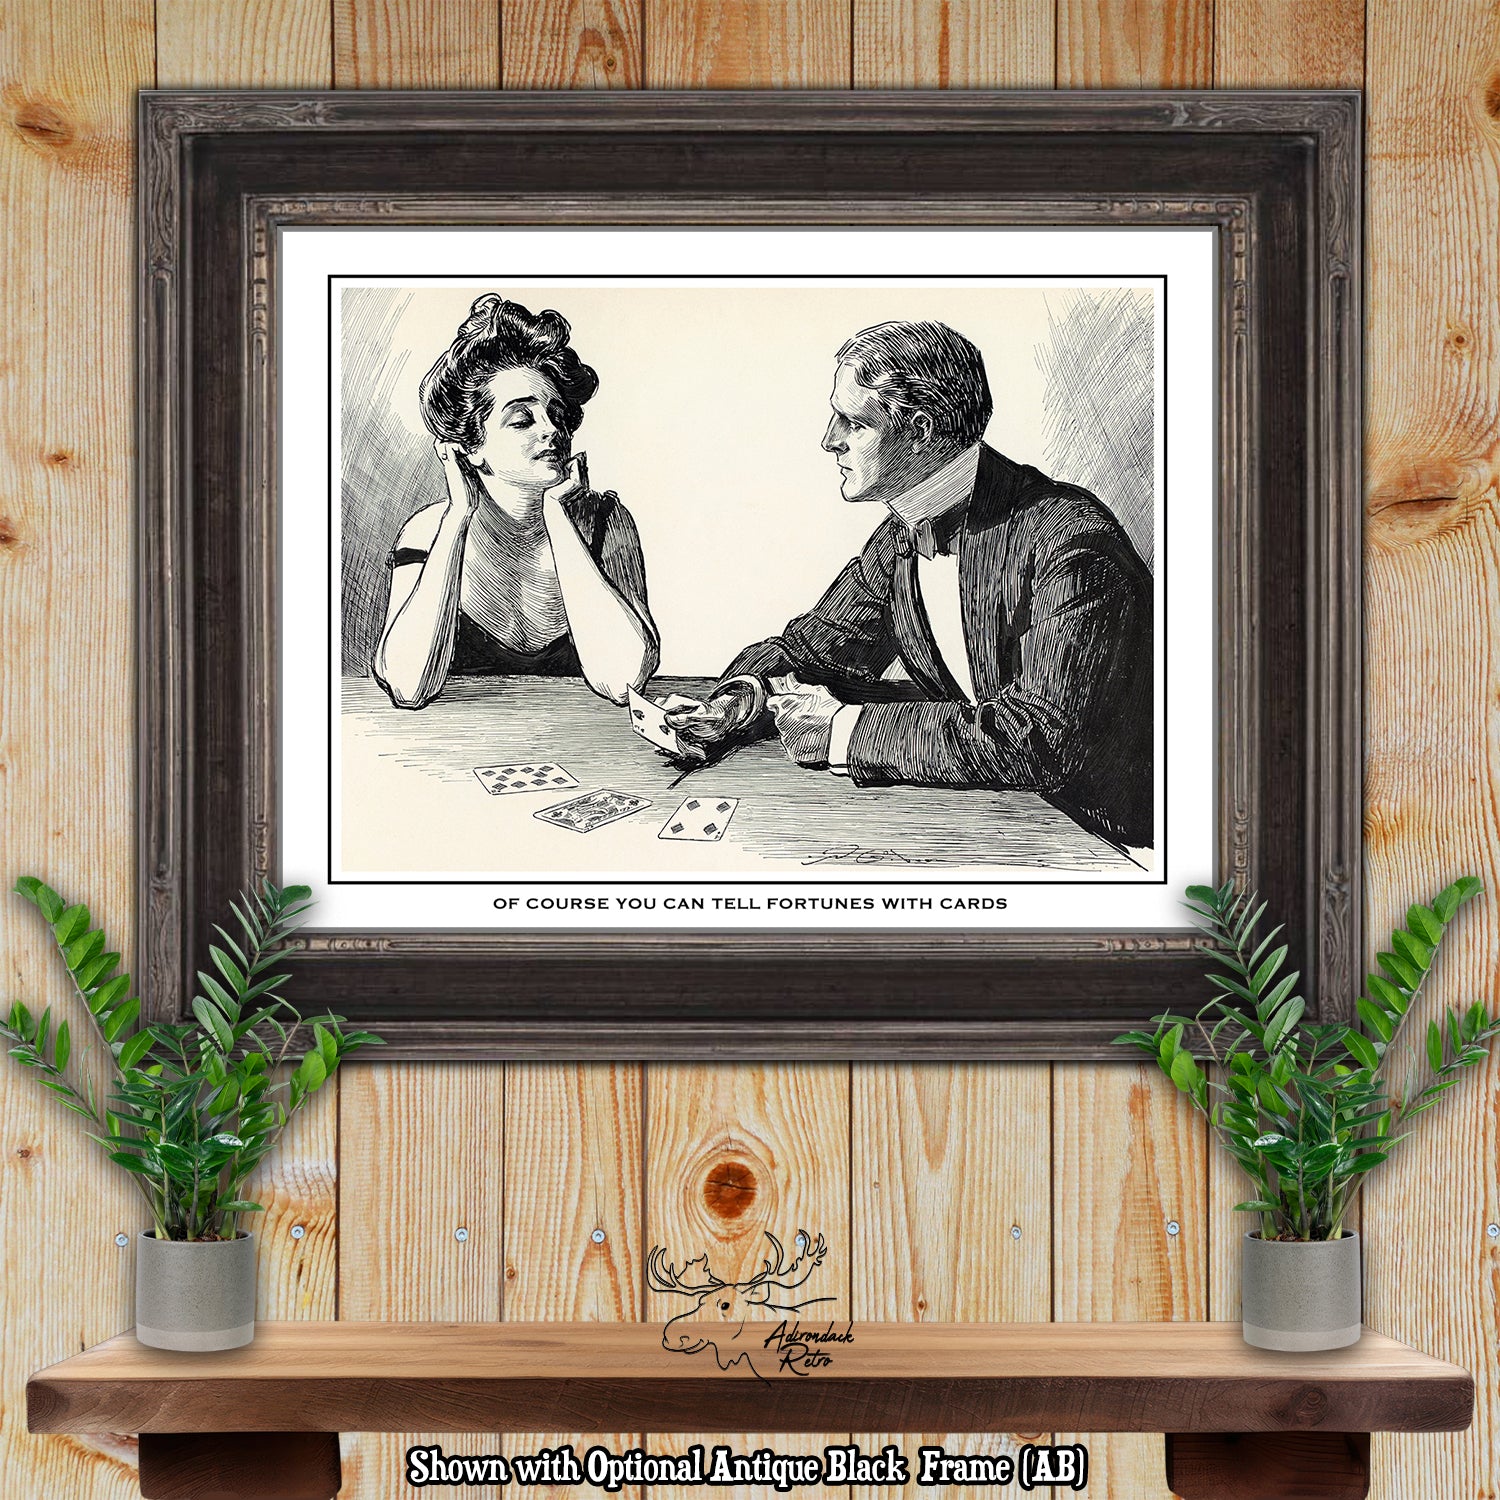 Of Course You Can Tell Fortunes With Cards by Charles Dana Gibson Giclee Fine Art Print at Adirondack Retro